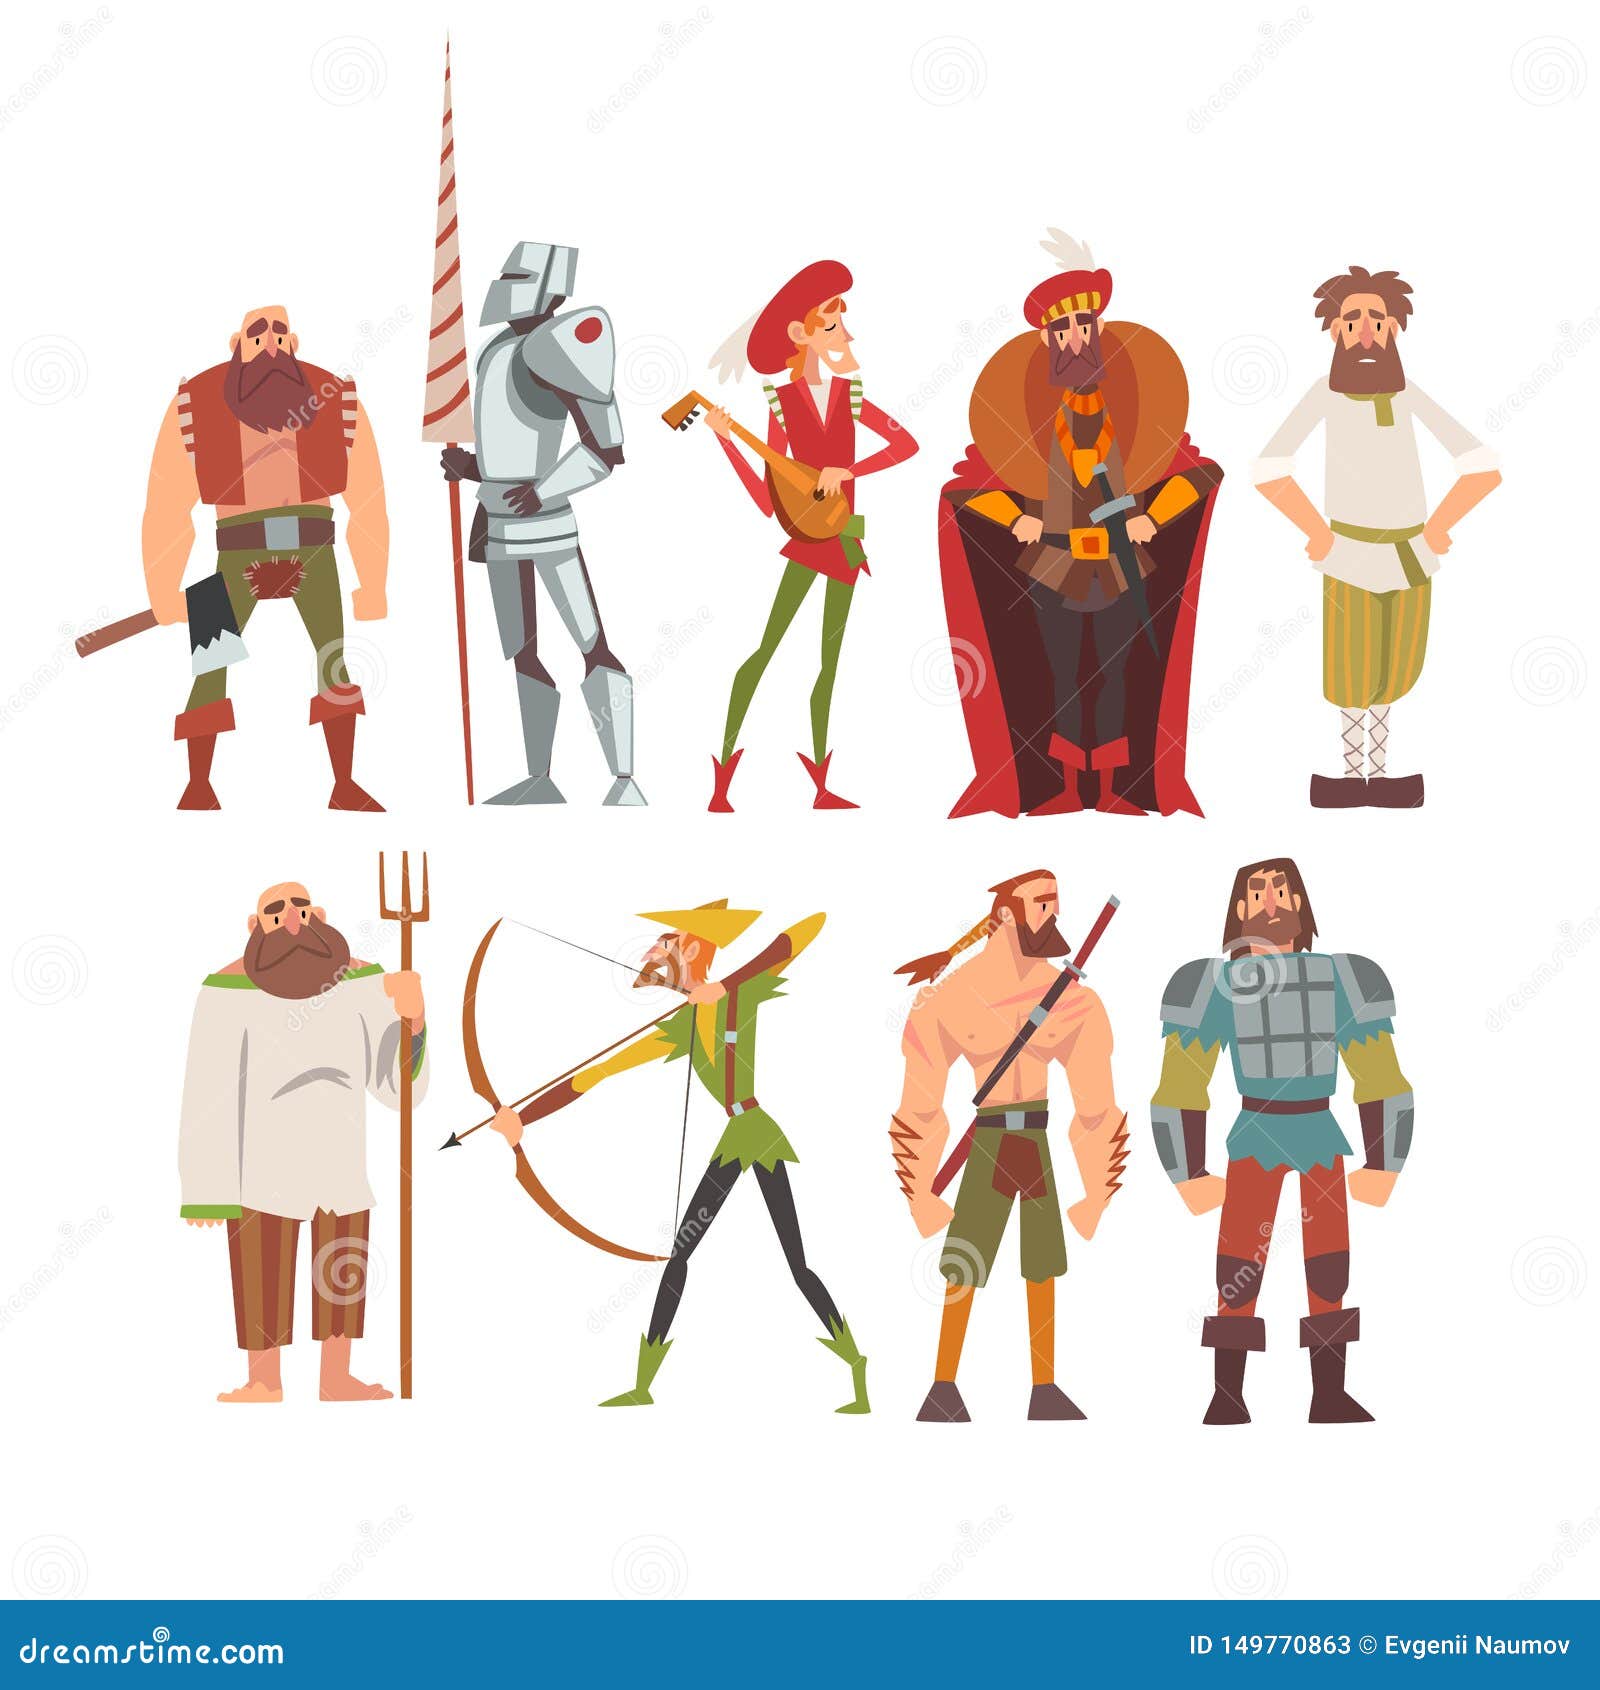 medieval historical cartoon characters in traditional costumes set, peasant, warrior, nobleman, archer, musician